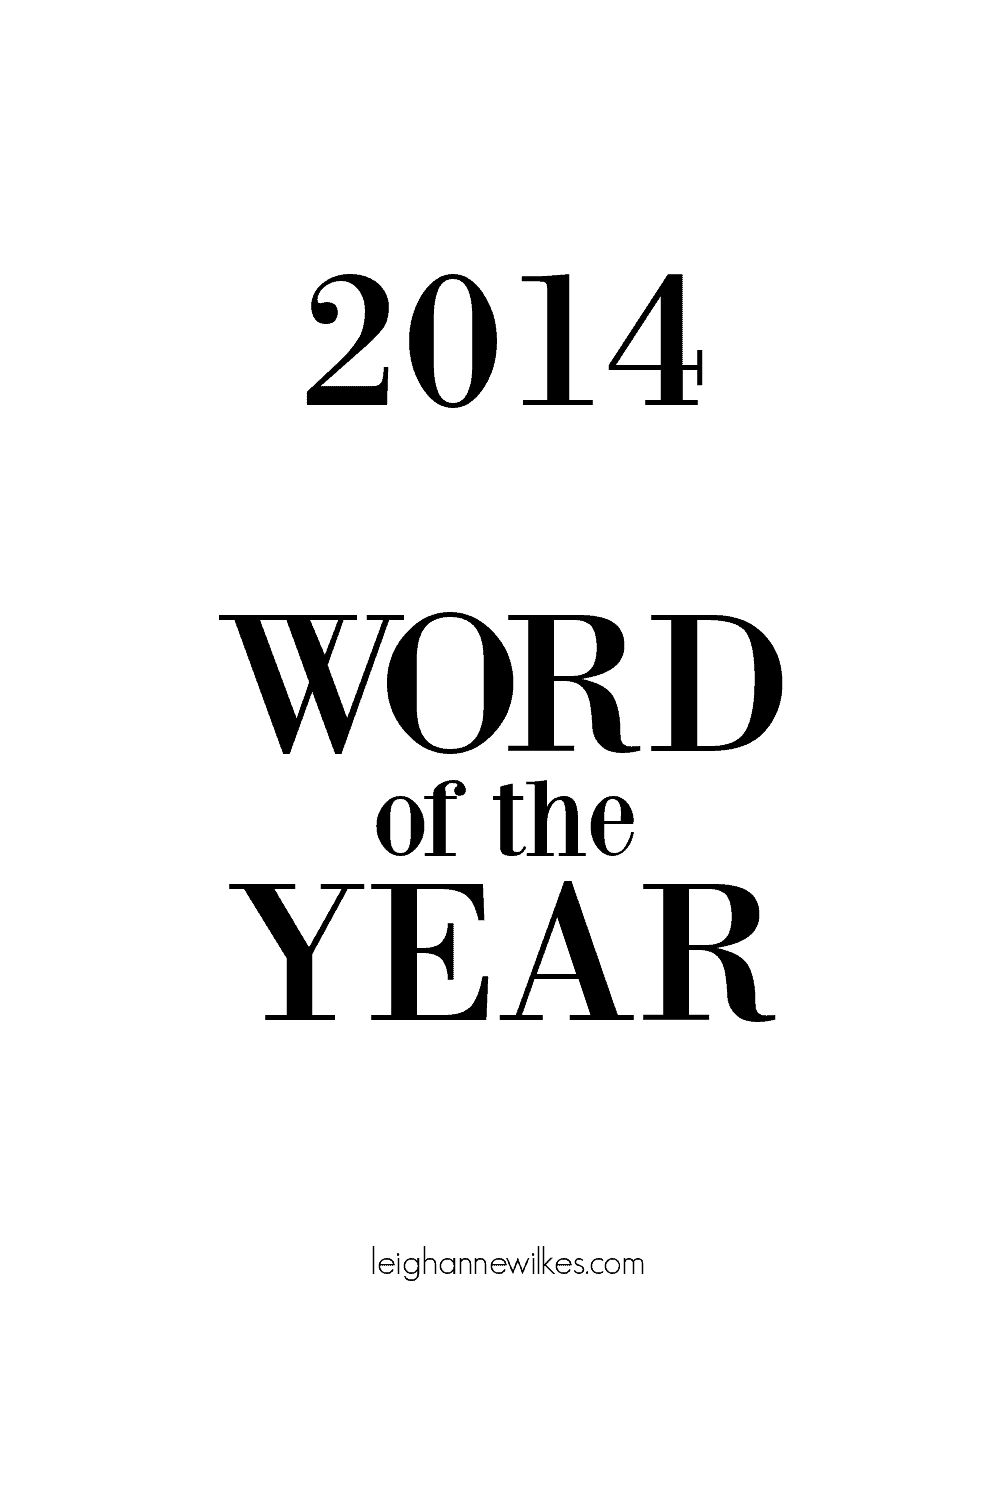 2014 word of the year